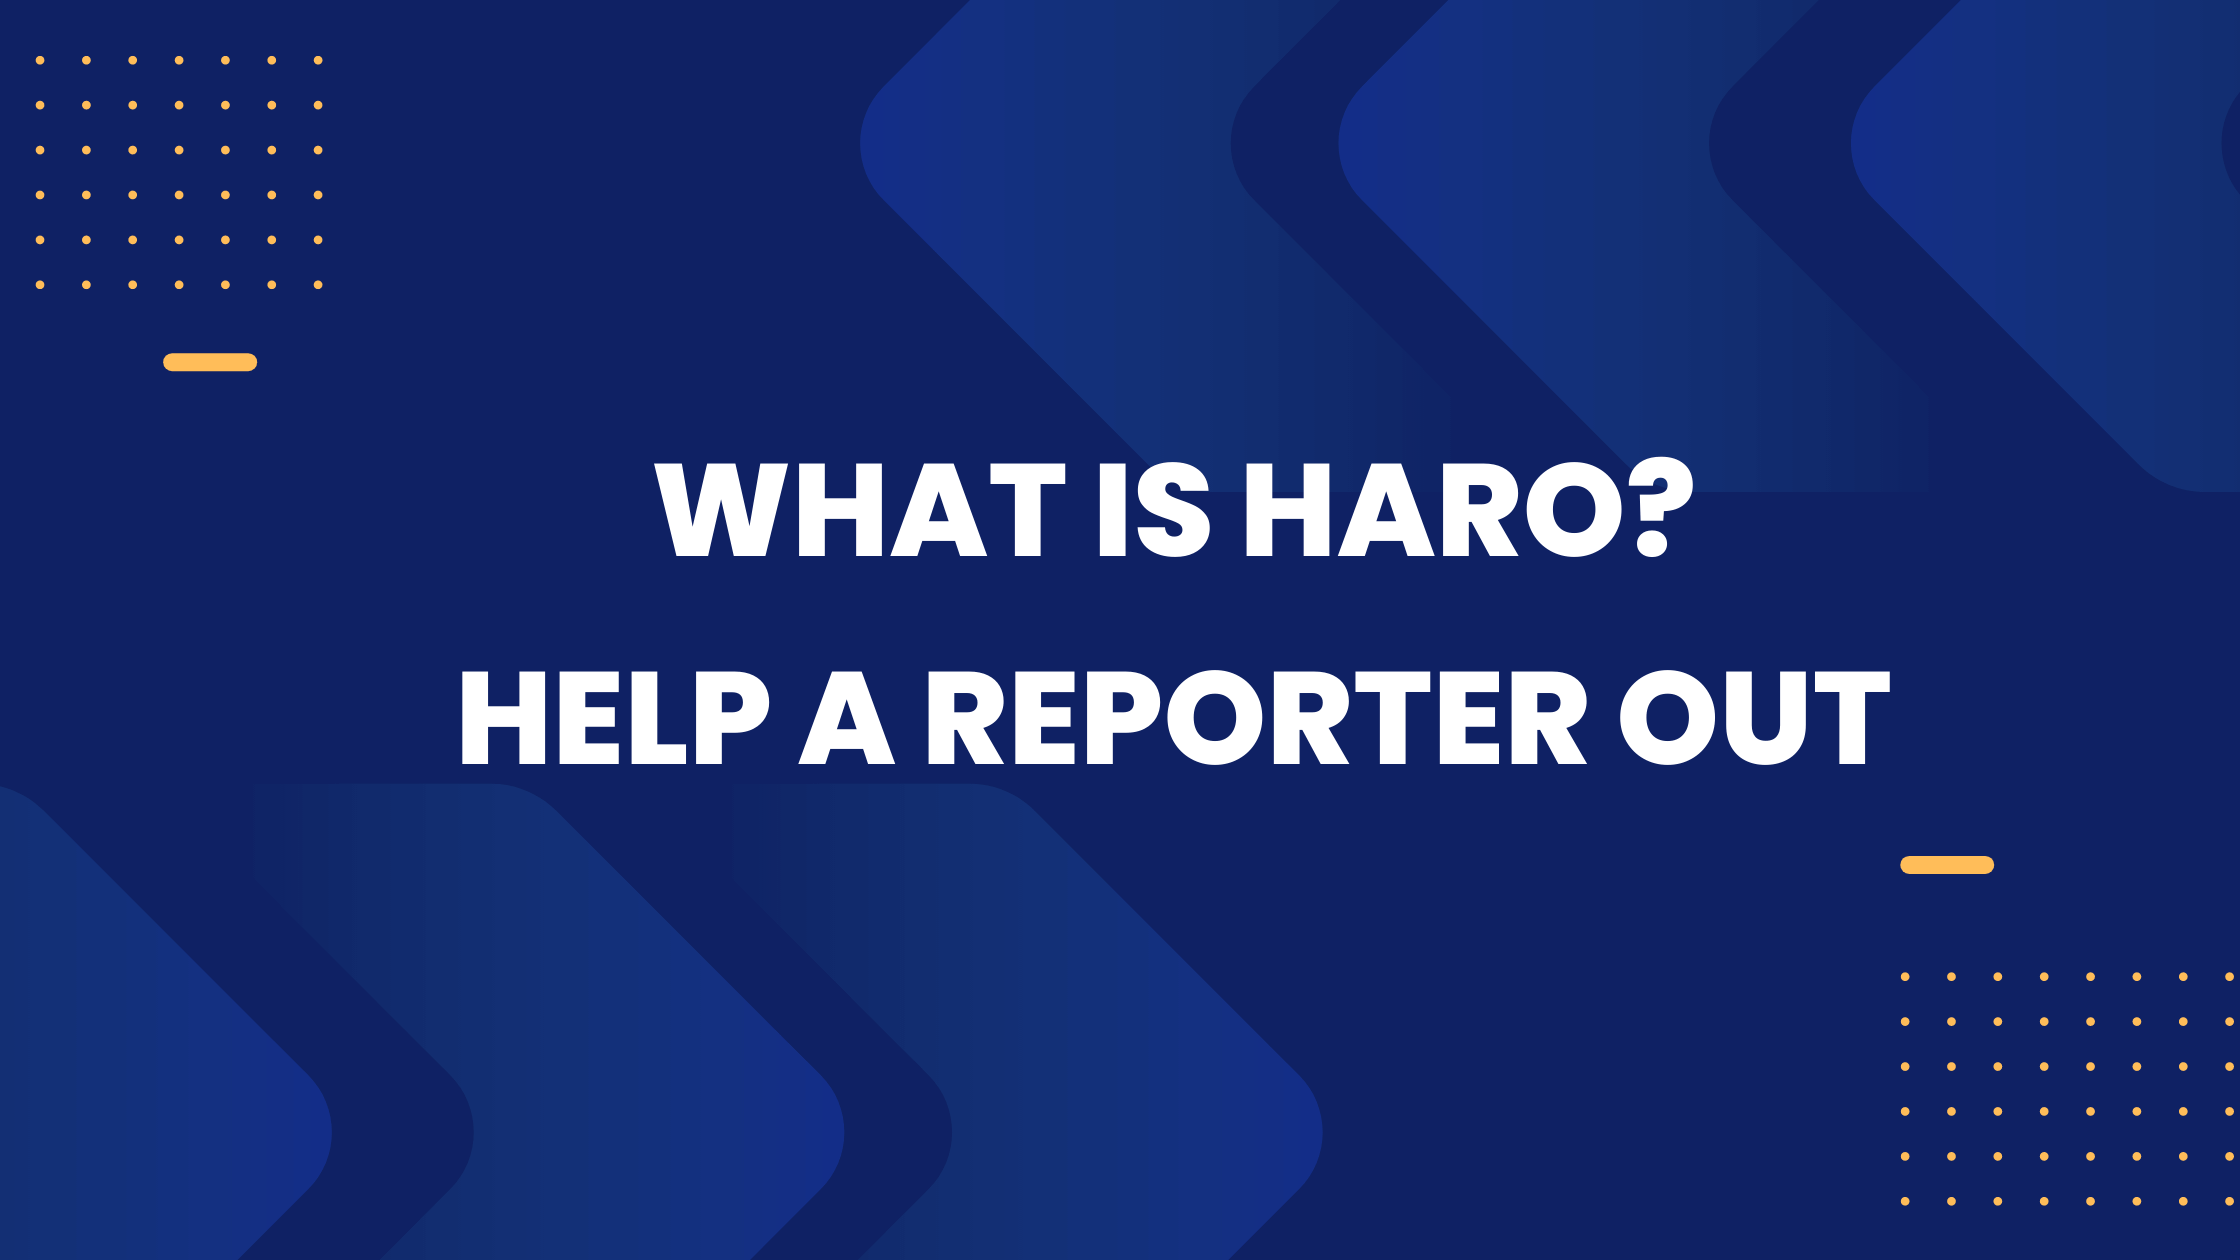 What is HARO - Help a Reporter Out in a blue background